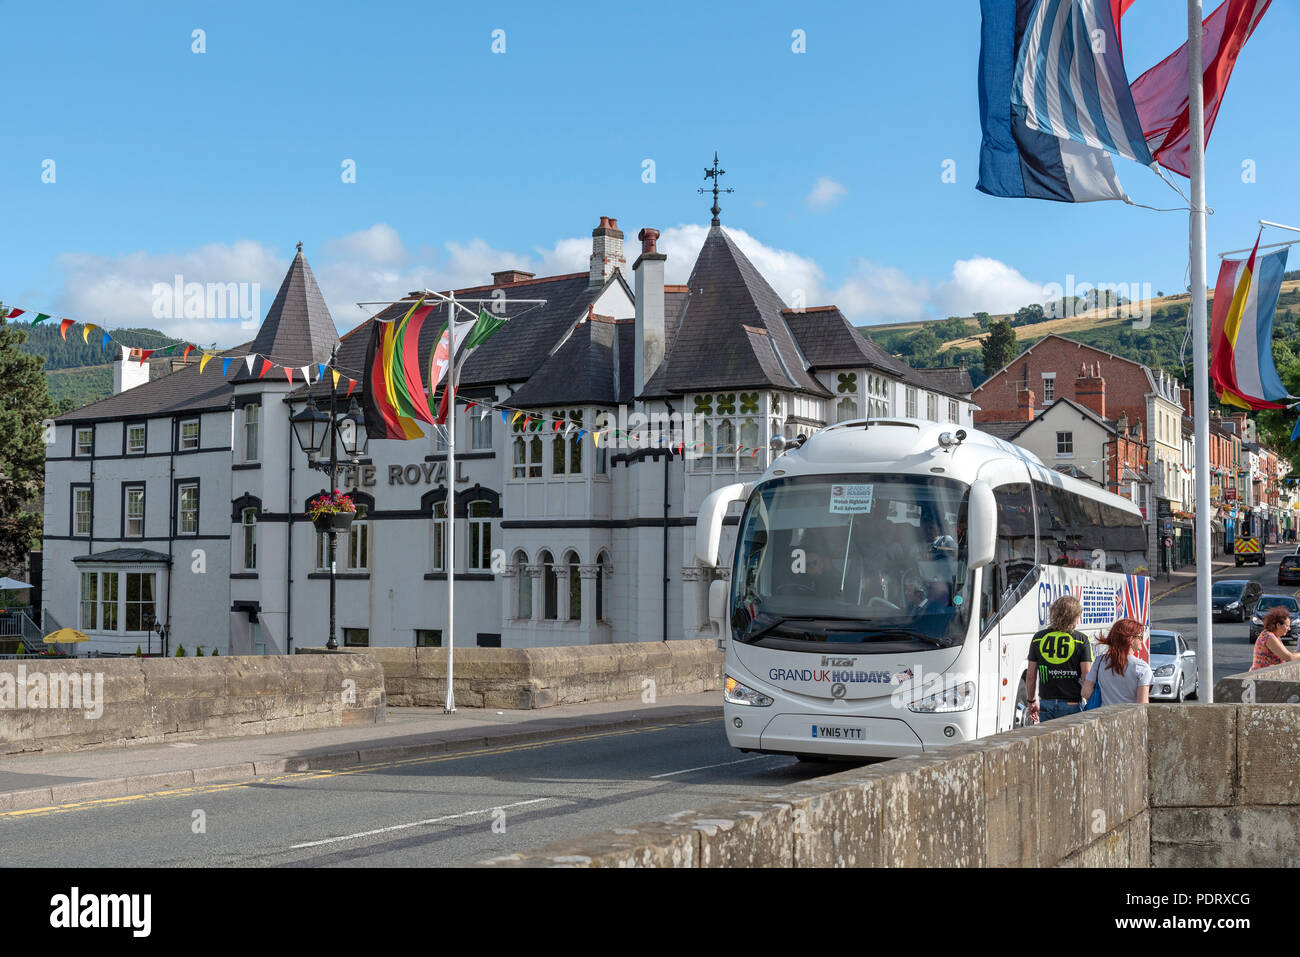 Llangollen, Denbighshire, North Wales, UK. A popular tourist attraction which stands on the River Dee. A tourbus passing over the town bridge. Stock Photo